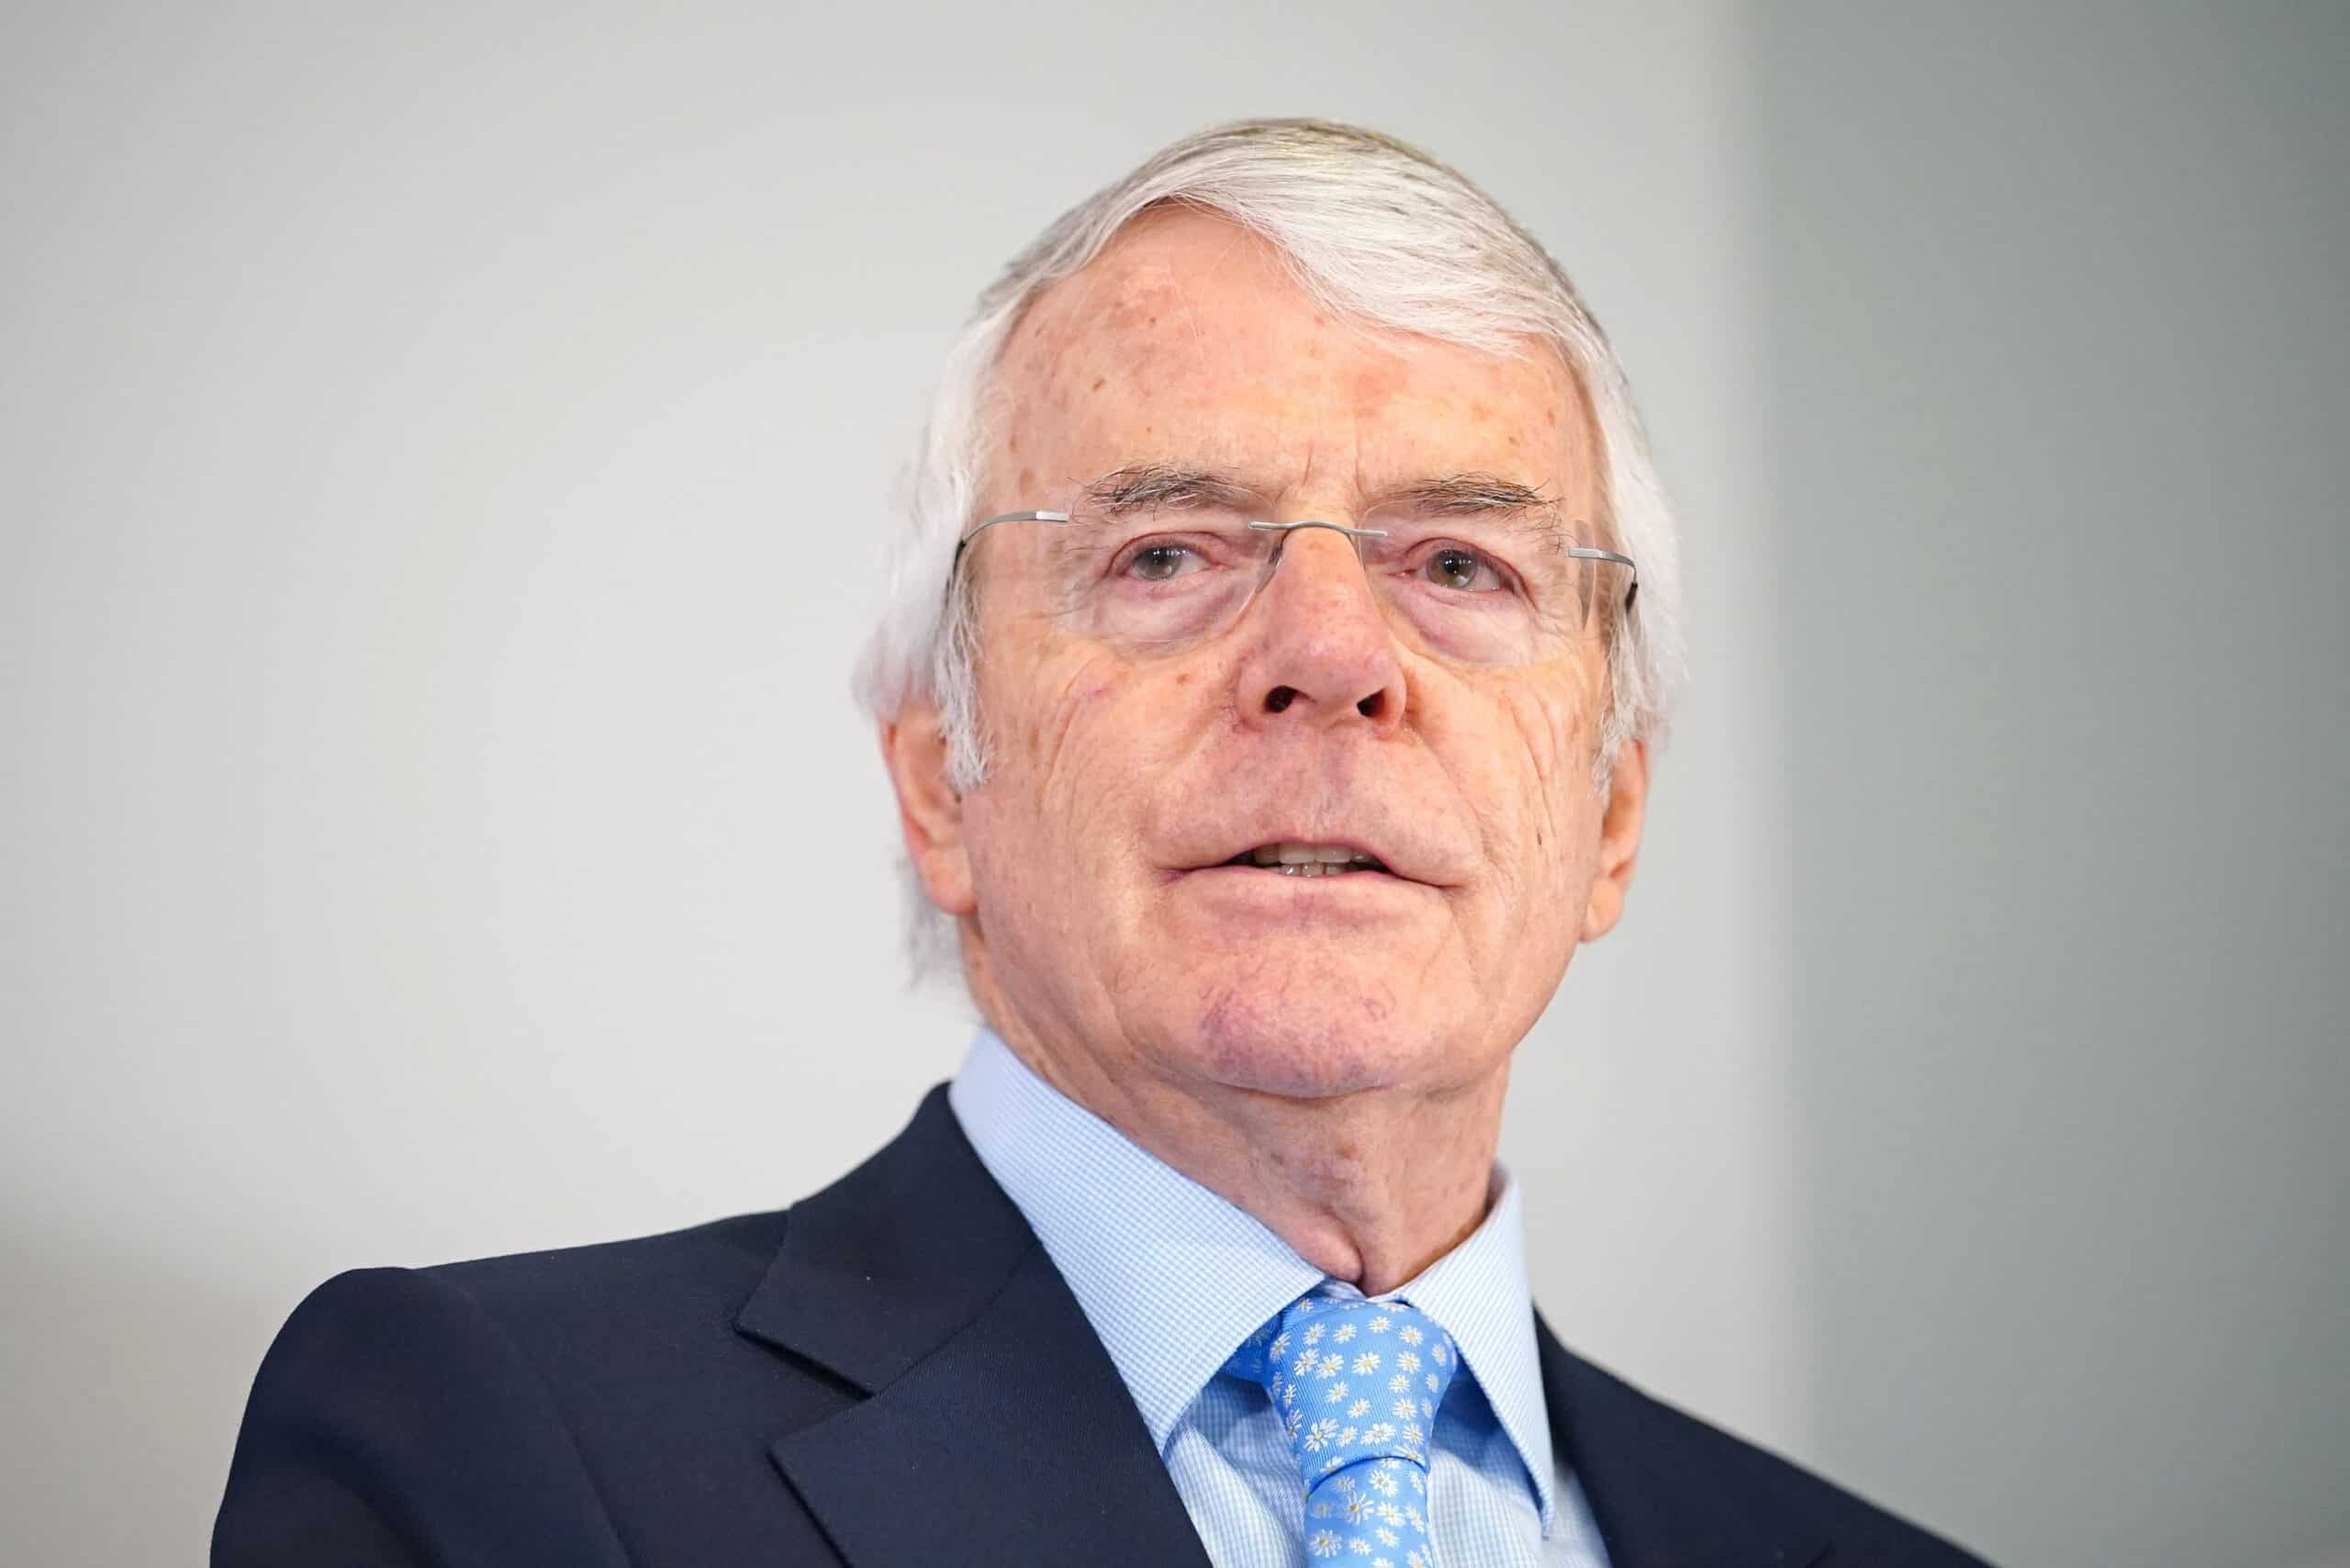 Brexit was a ‘colossal mistake’, former PM Sir John Major tells committee